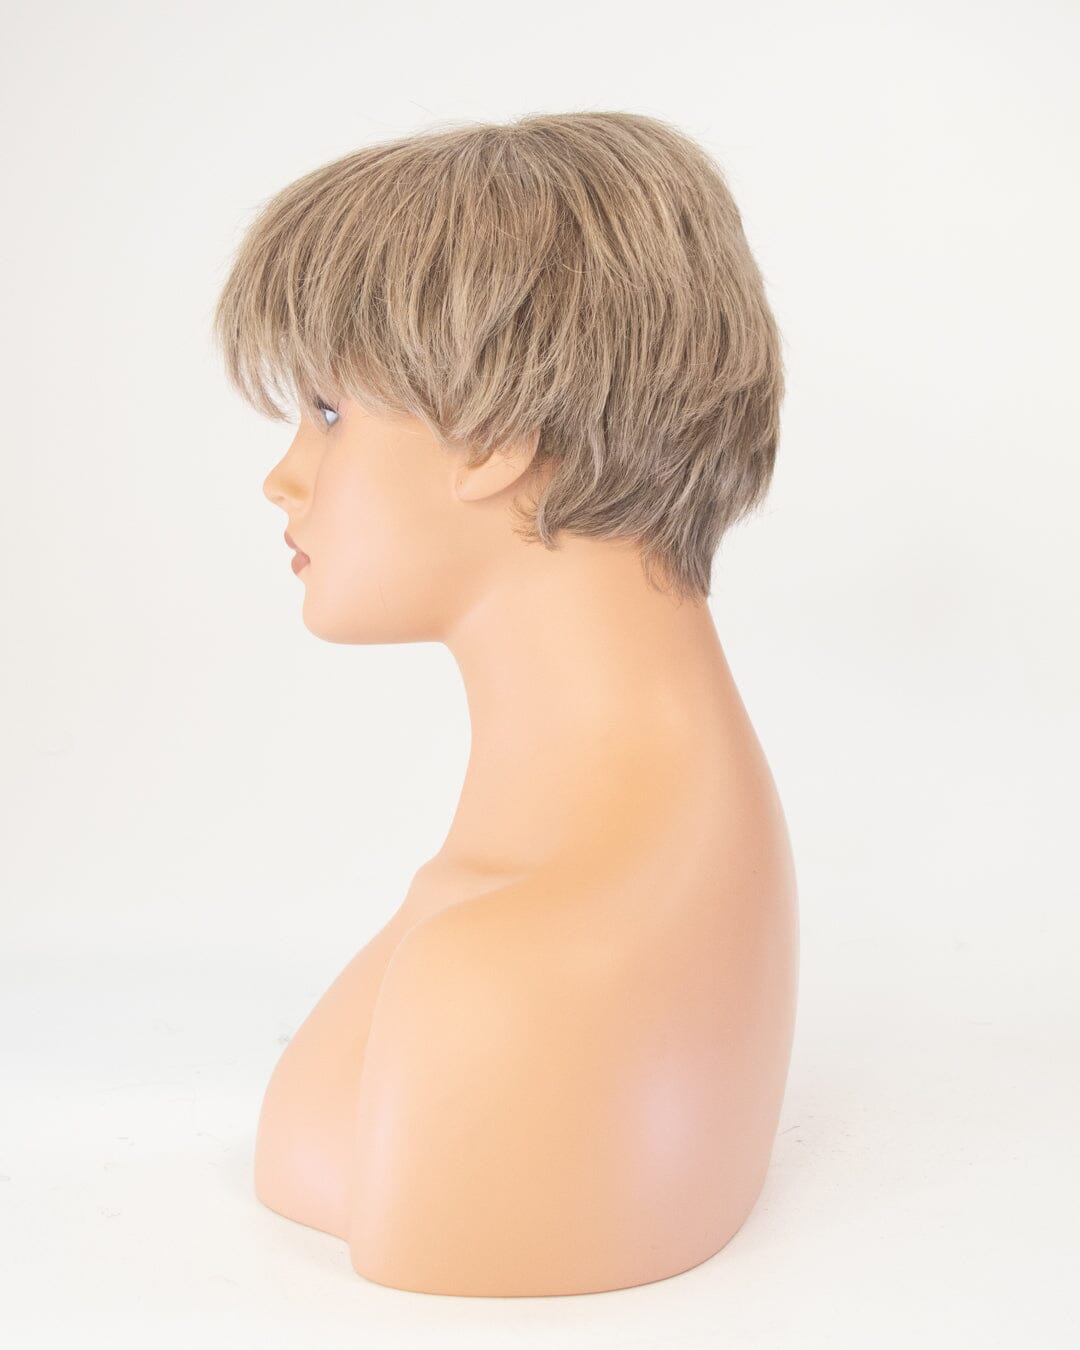 Mousey Brown Short Synthetic Hair Wig